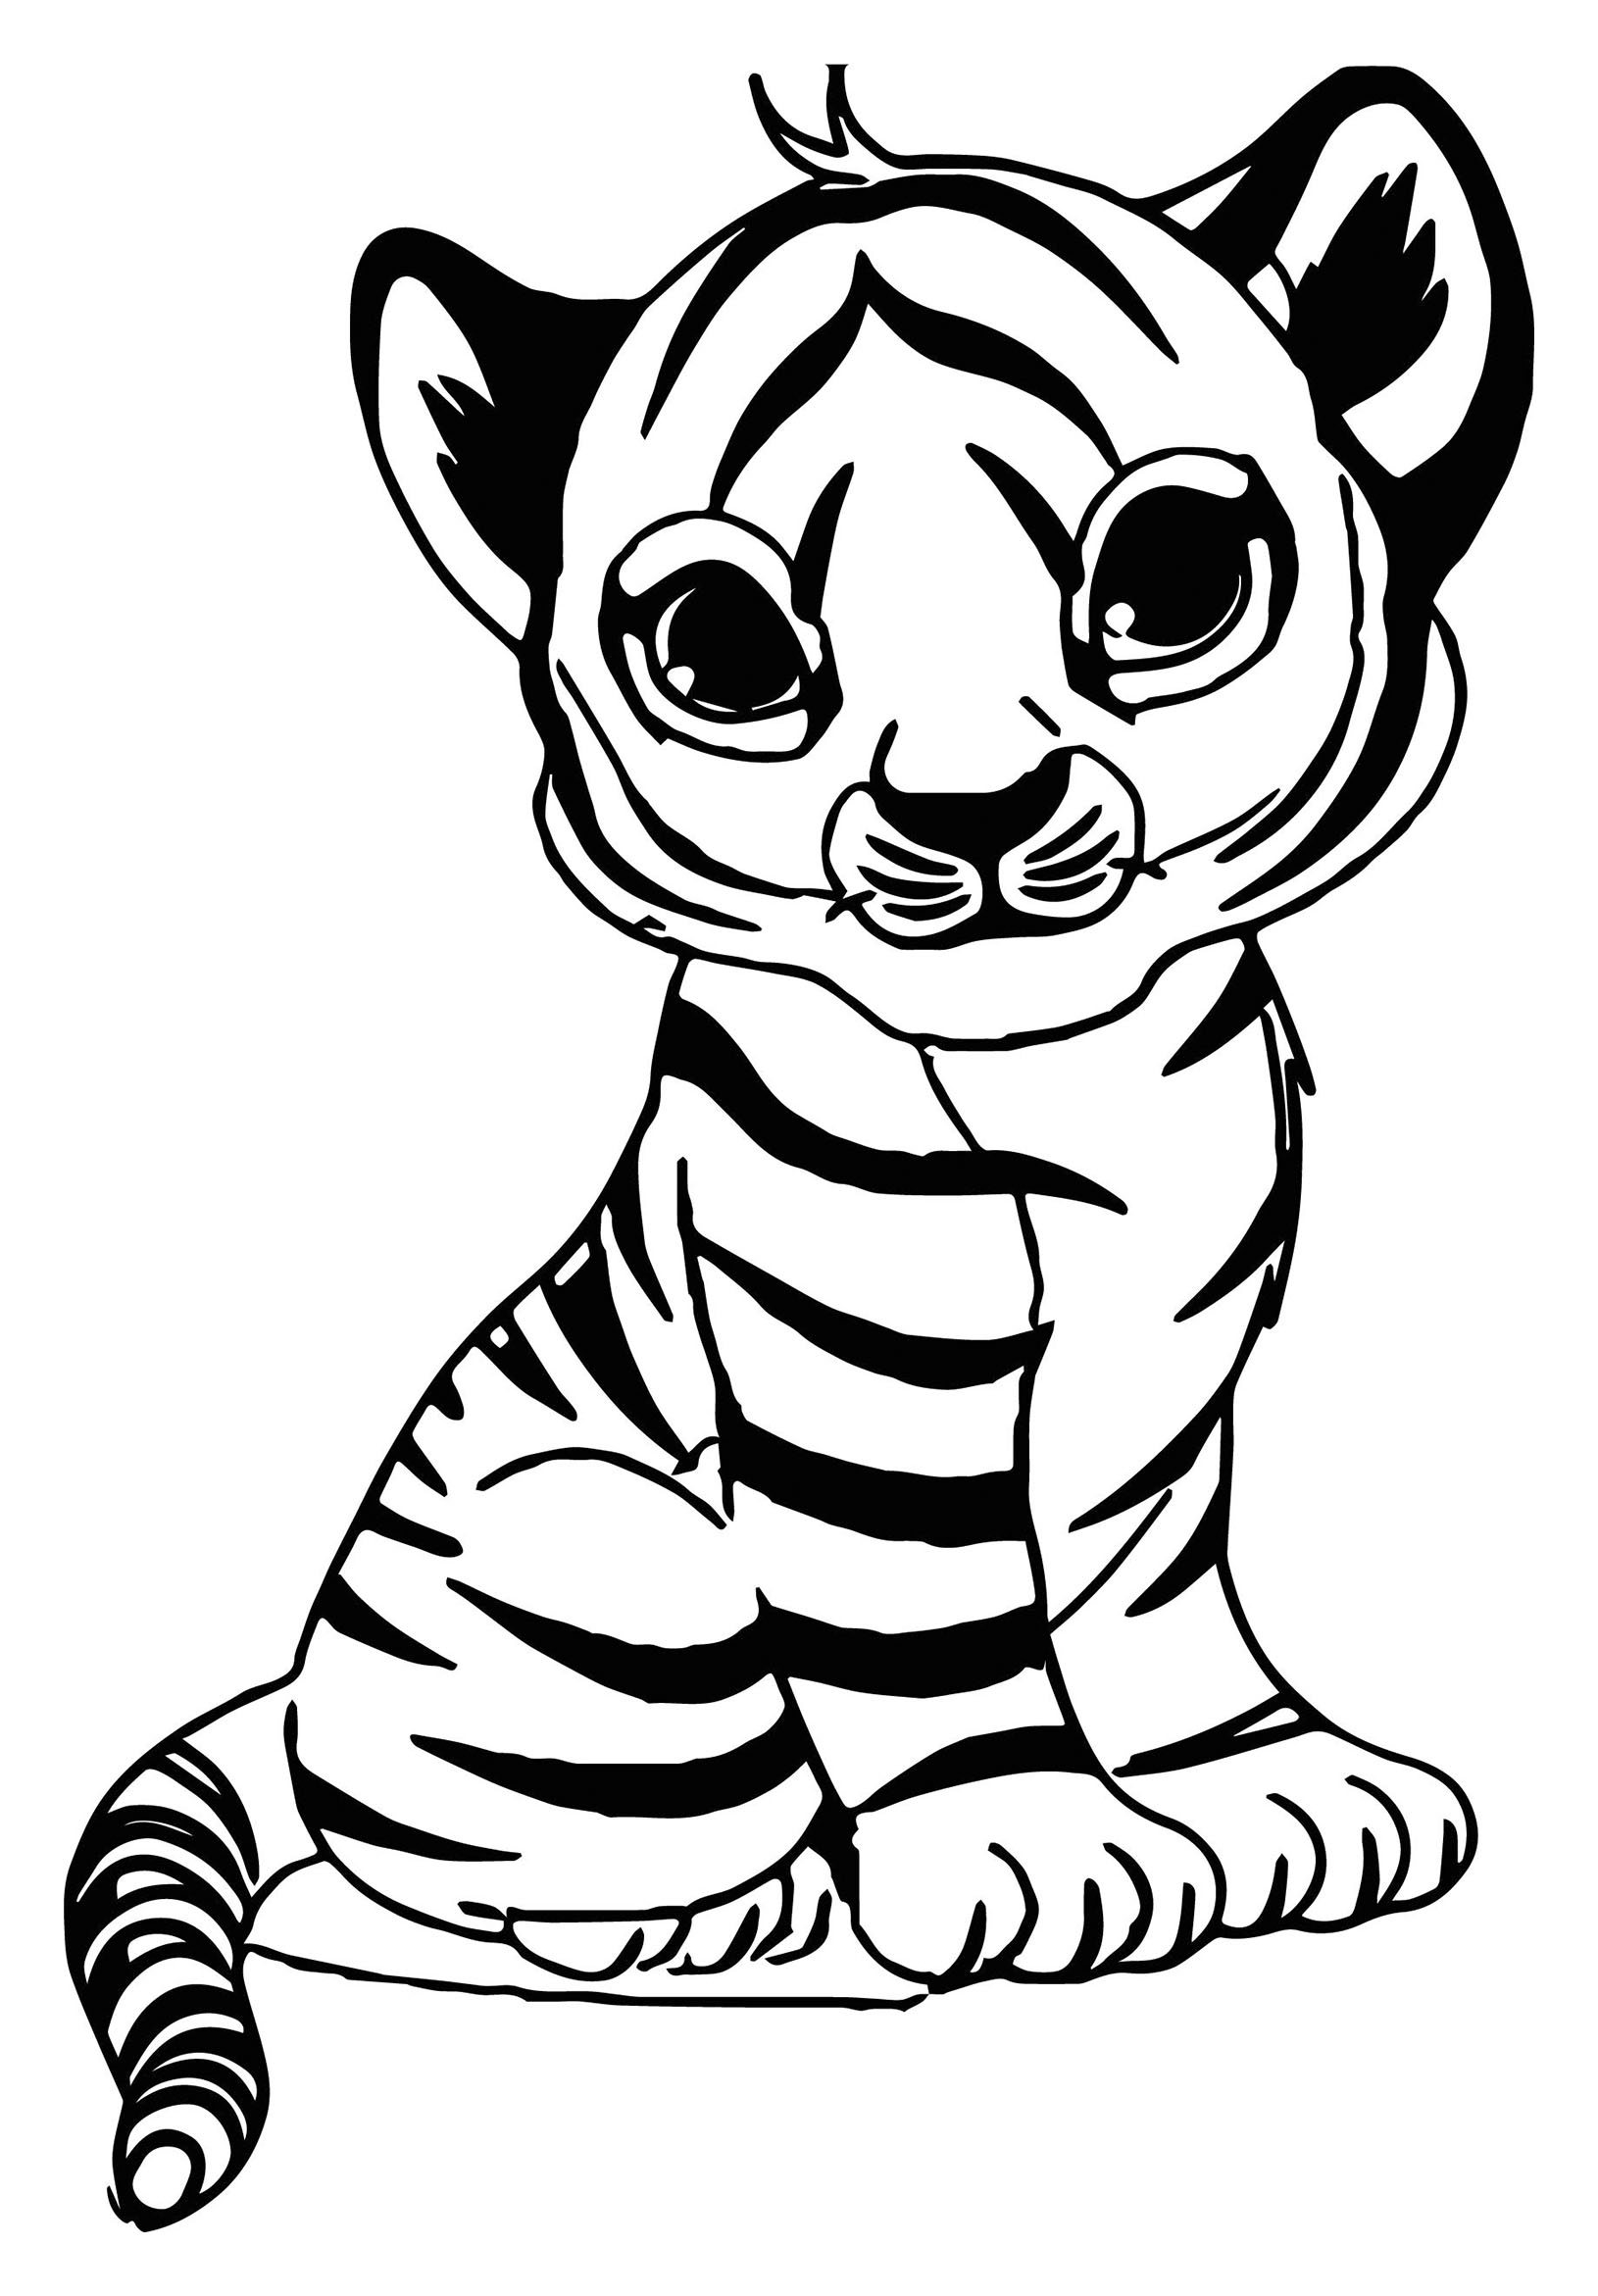 Tigers to print for free - Tigers Kids Coloring Pages